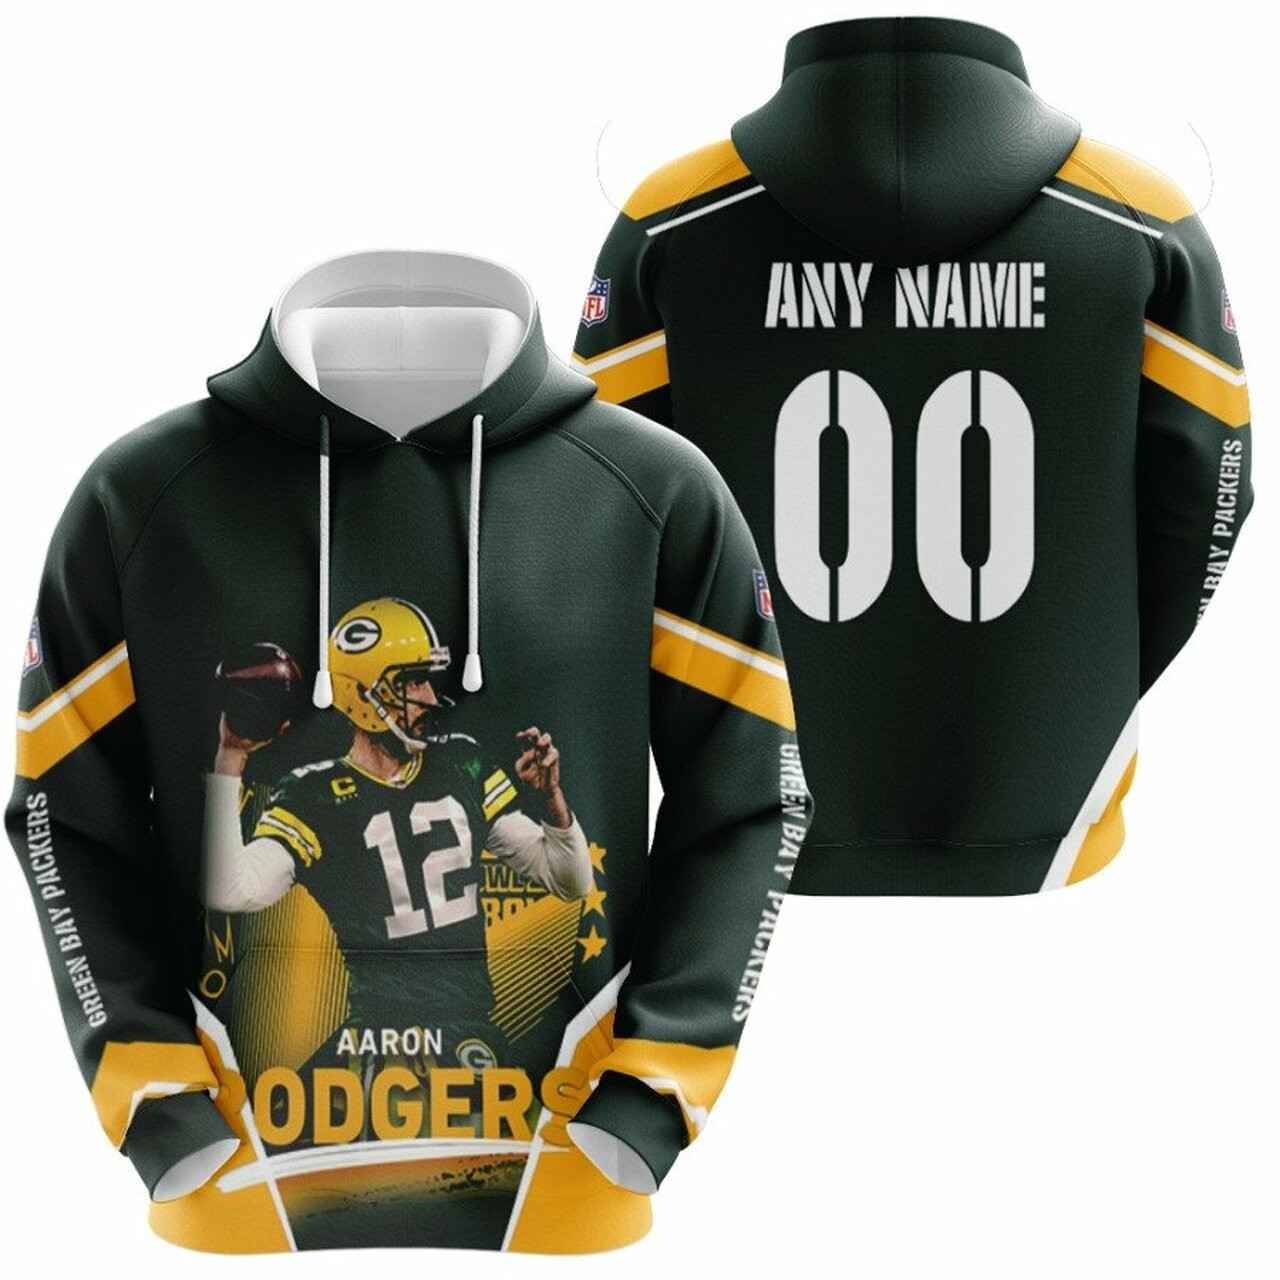 Aaron Rodgers Green Bay Packers Nfl Super Star The Leader Champions 3d Designed Allover Custom Name Number Gift For Rodgers Fans Packers Fans Hoodie